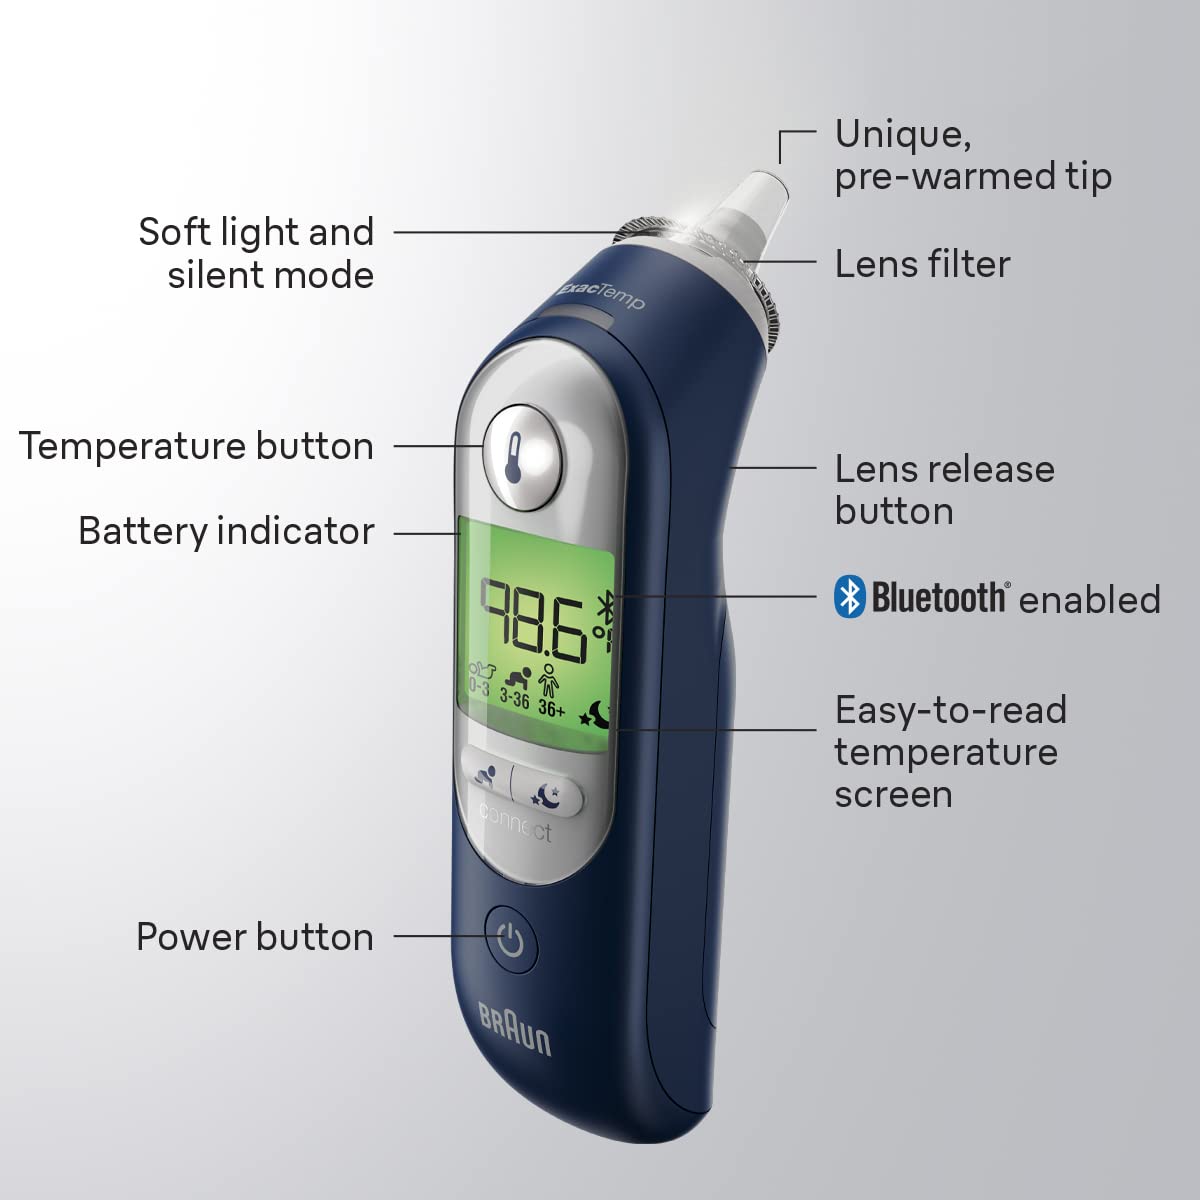 sponsored The Braun Thermoscan 7+ connect thermometer is exactly